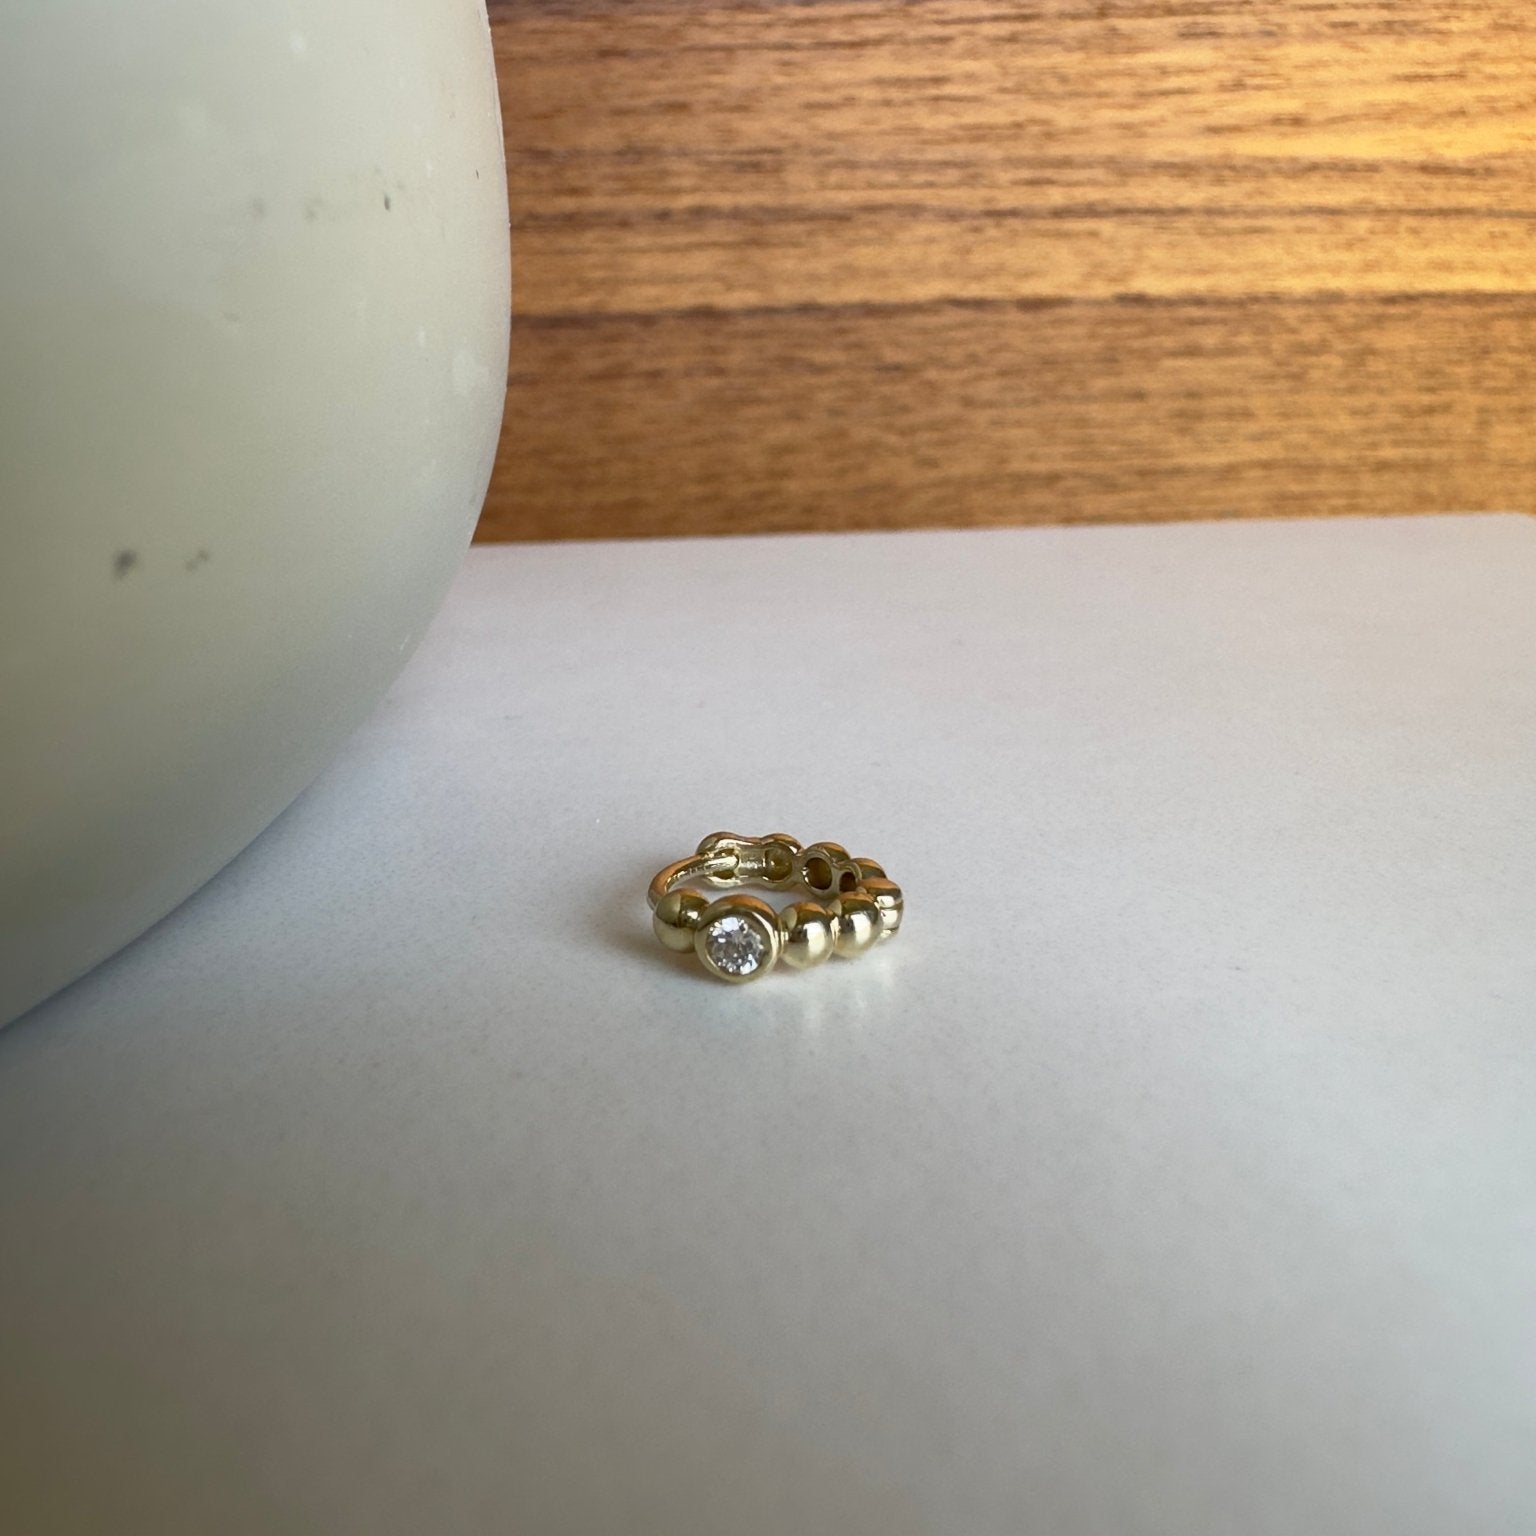 Diamond Beaded Huggie Hoop Earring in Solid 14k Yellow Gold Earrings Estella Collection #product_description# 18522 14k April Birthstone Birthstone #tag4# #tag5# #tag6# #tag7# #tag8# #tag9# #tag10#